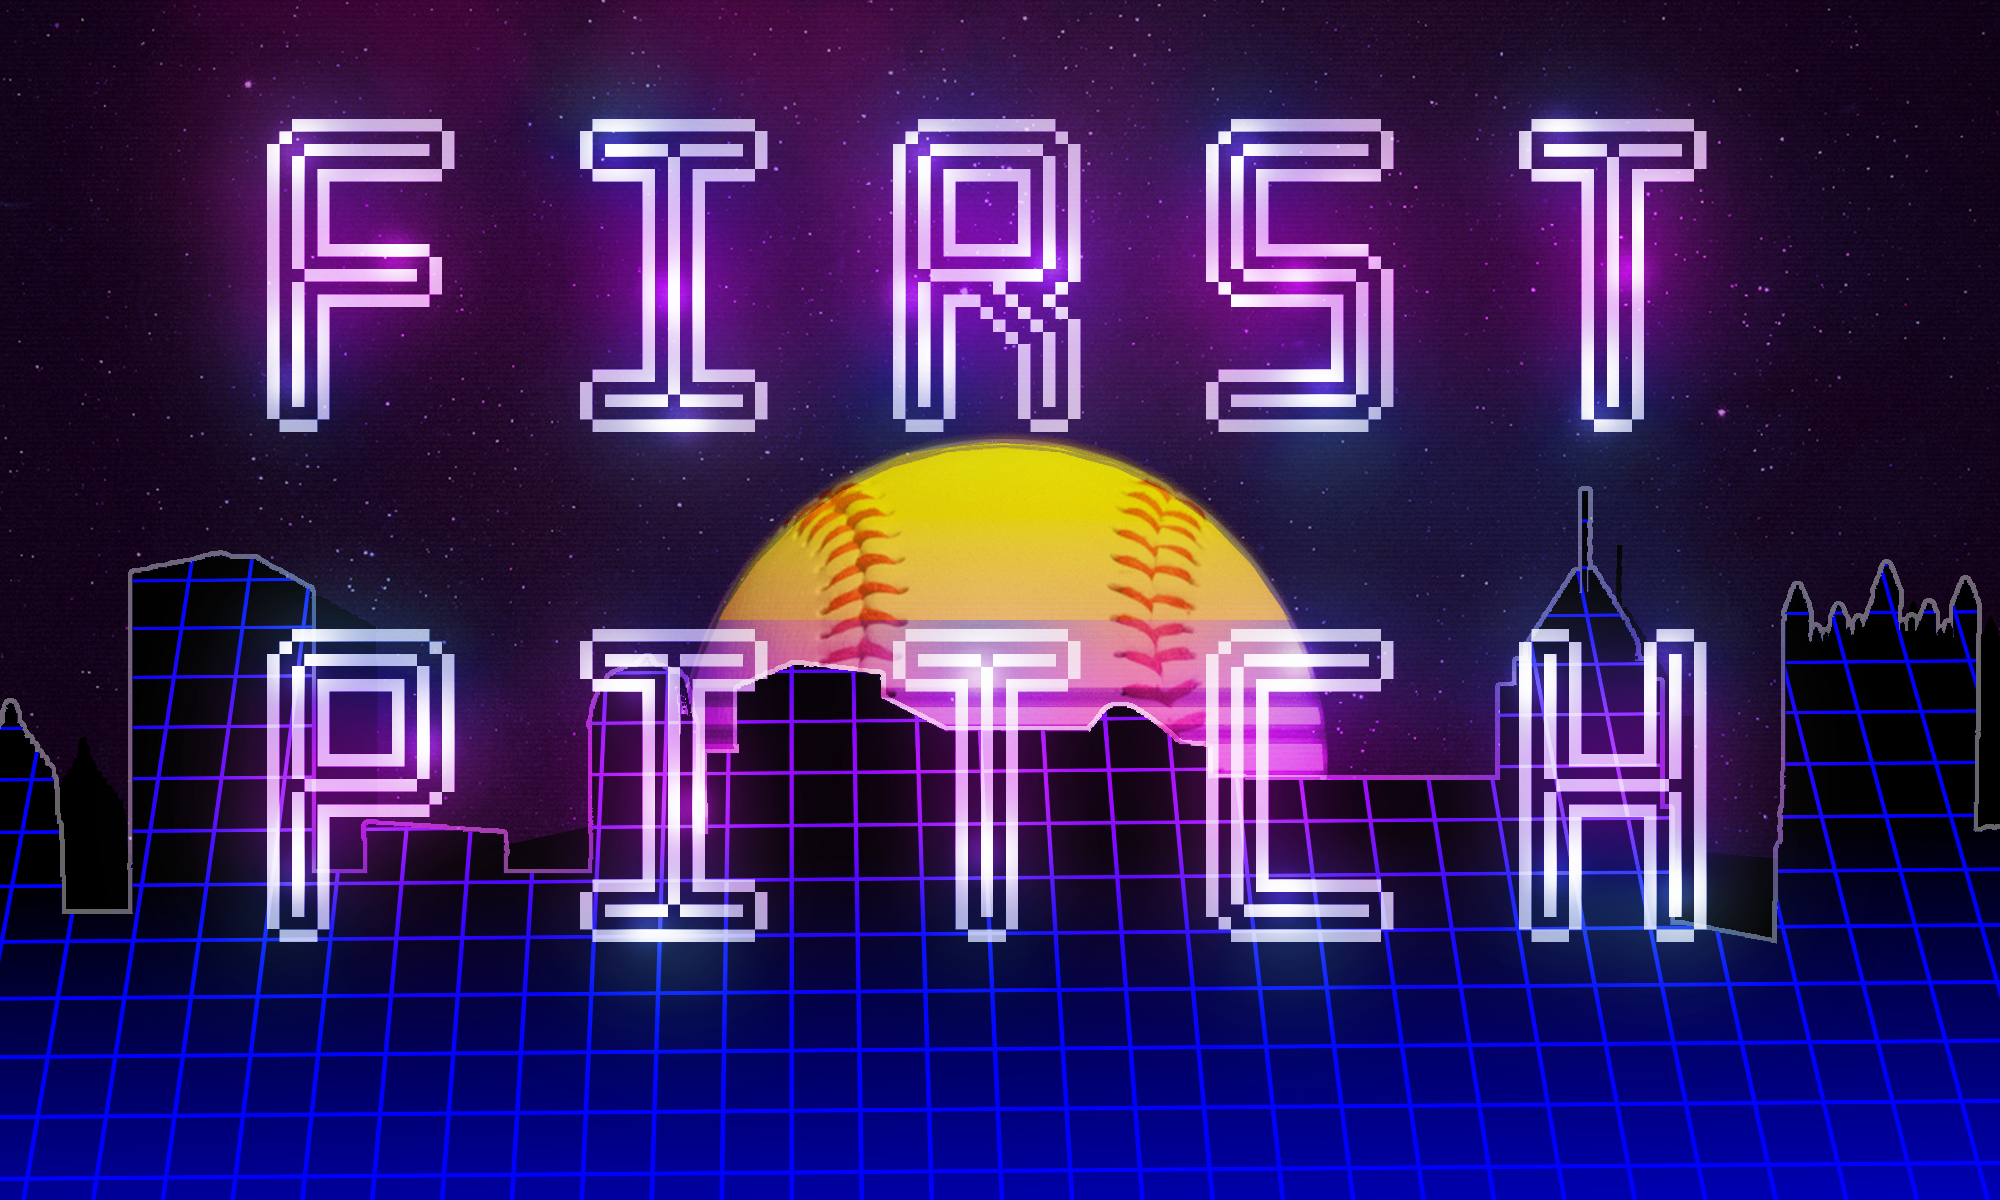 First Pitch: Alive in the Superunknown